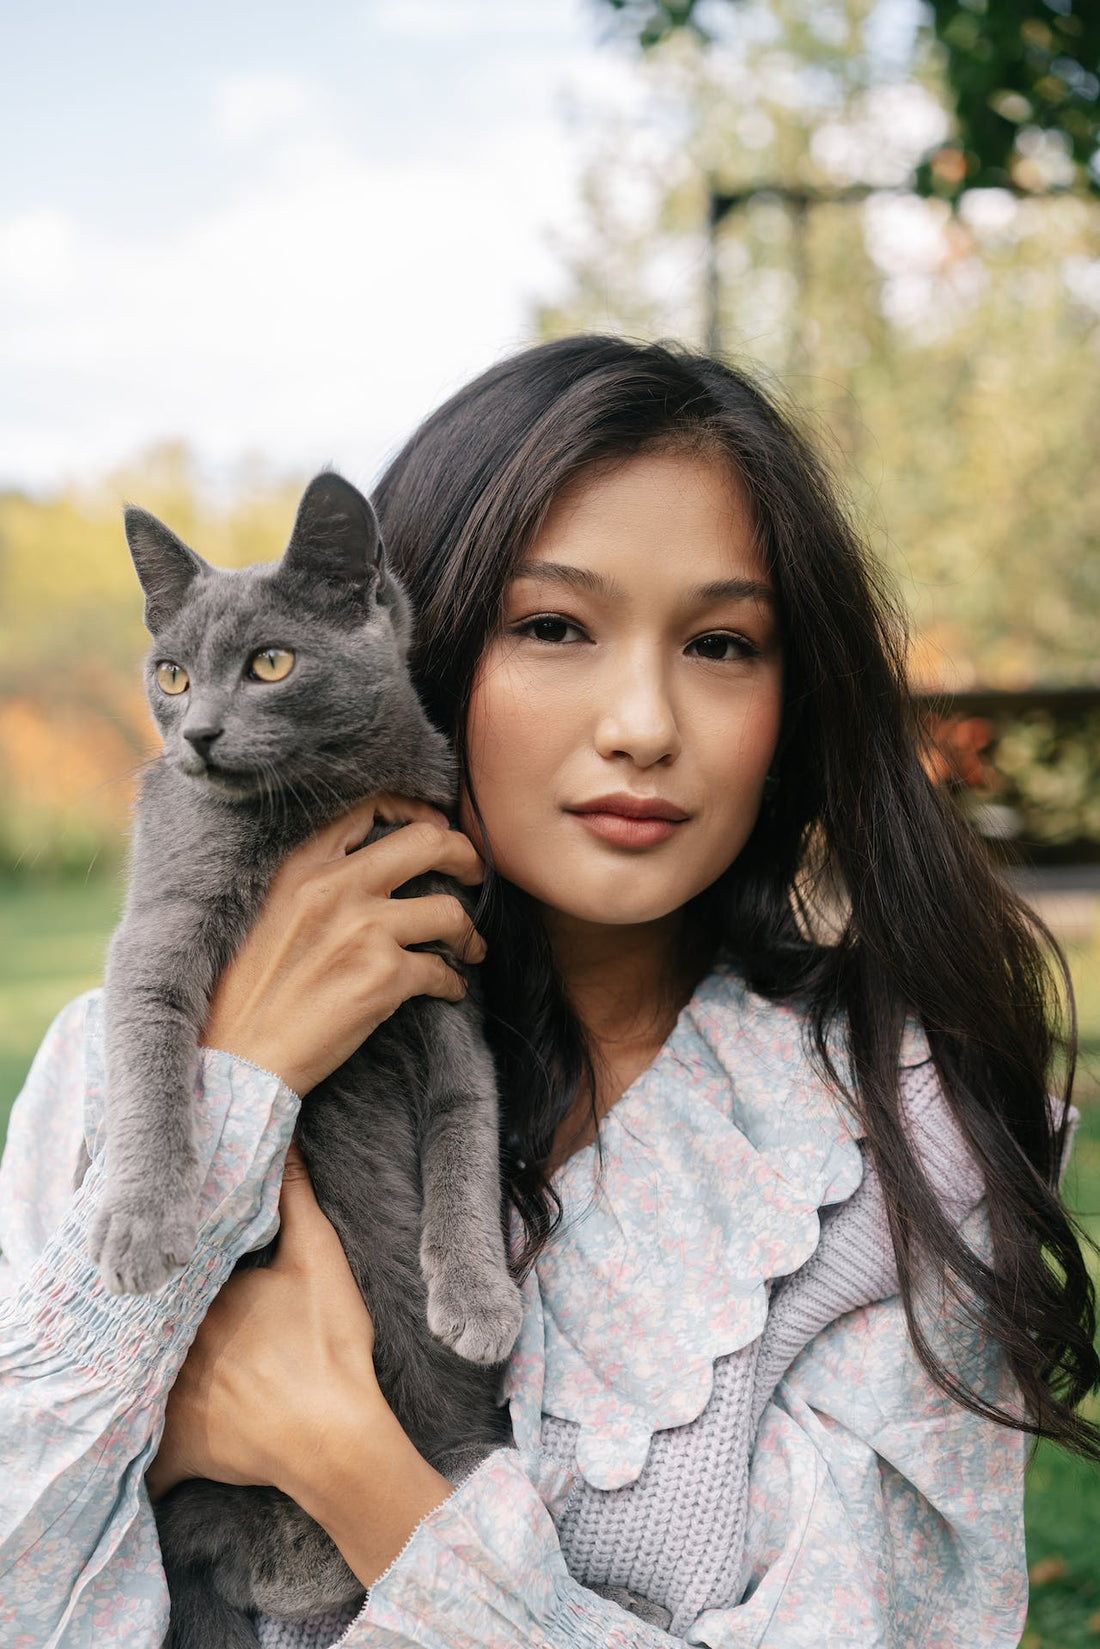 The Surprising Health Benefits of Being a Cat Owner